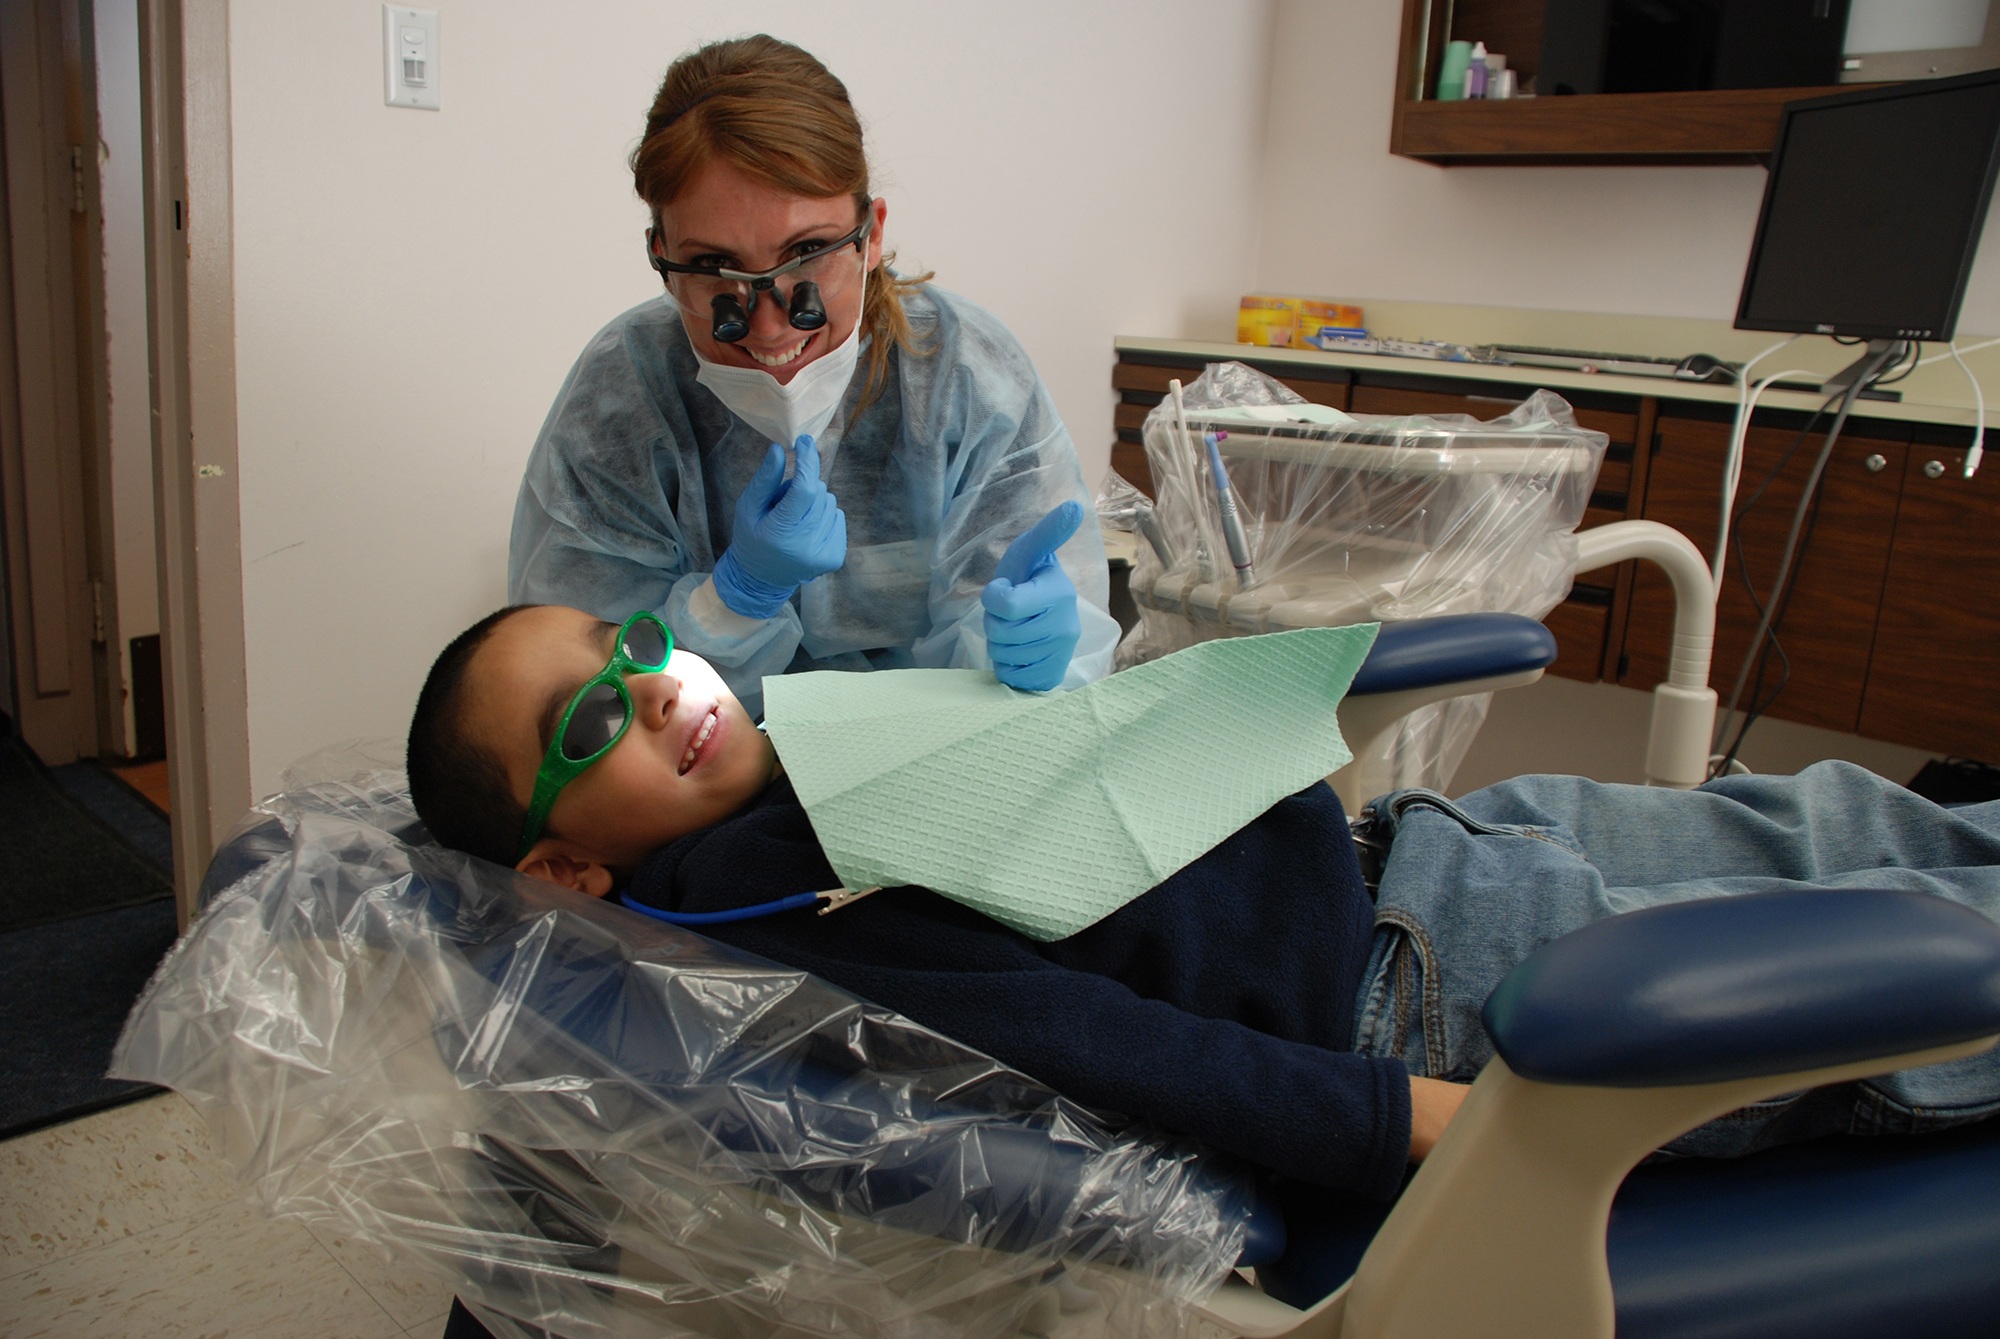 A dental hygienist giving a thumbs up with a smiling young patient